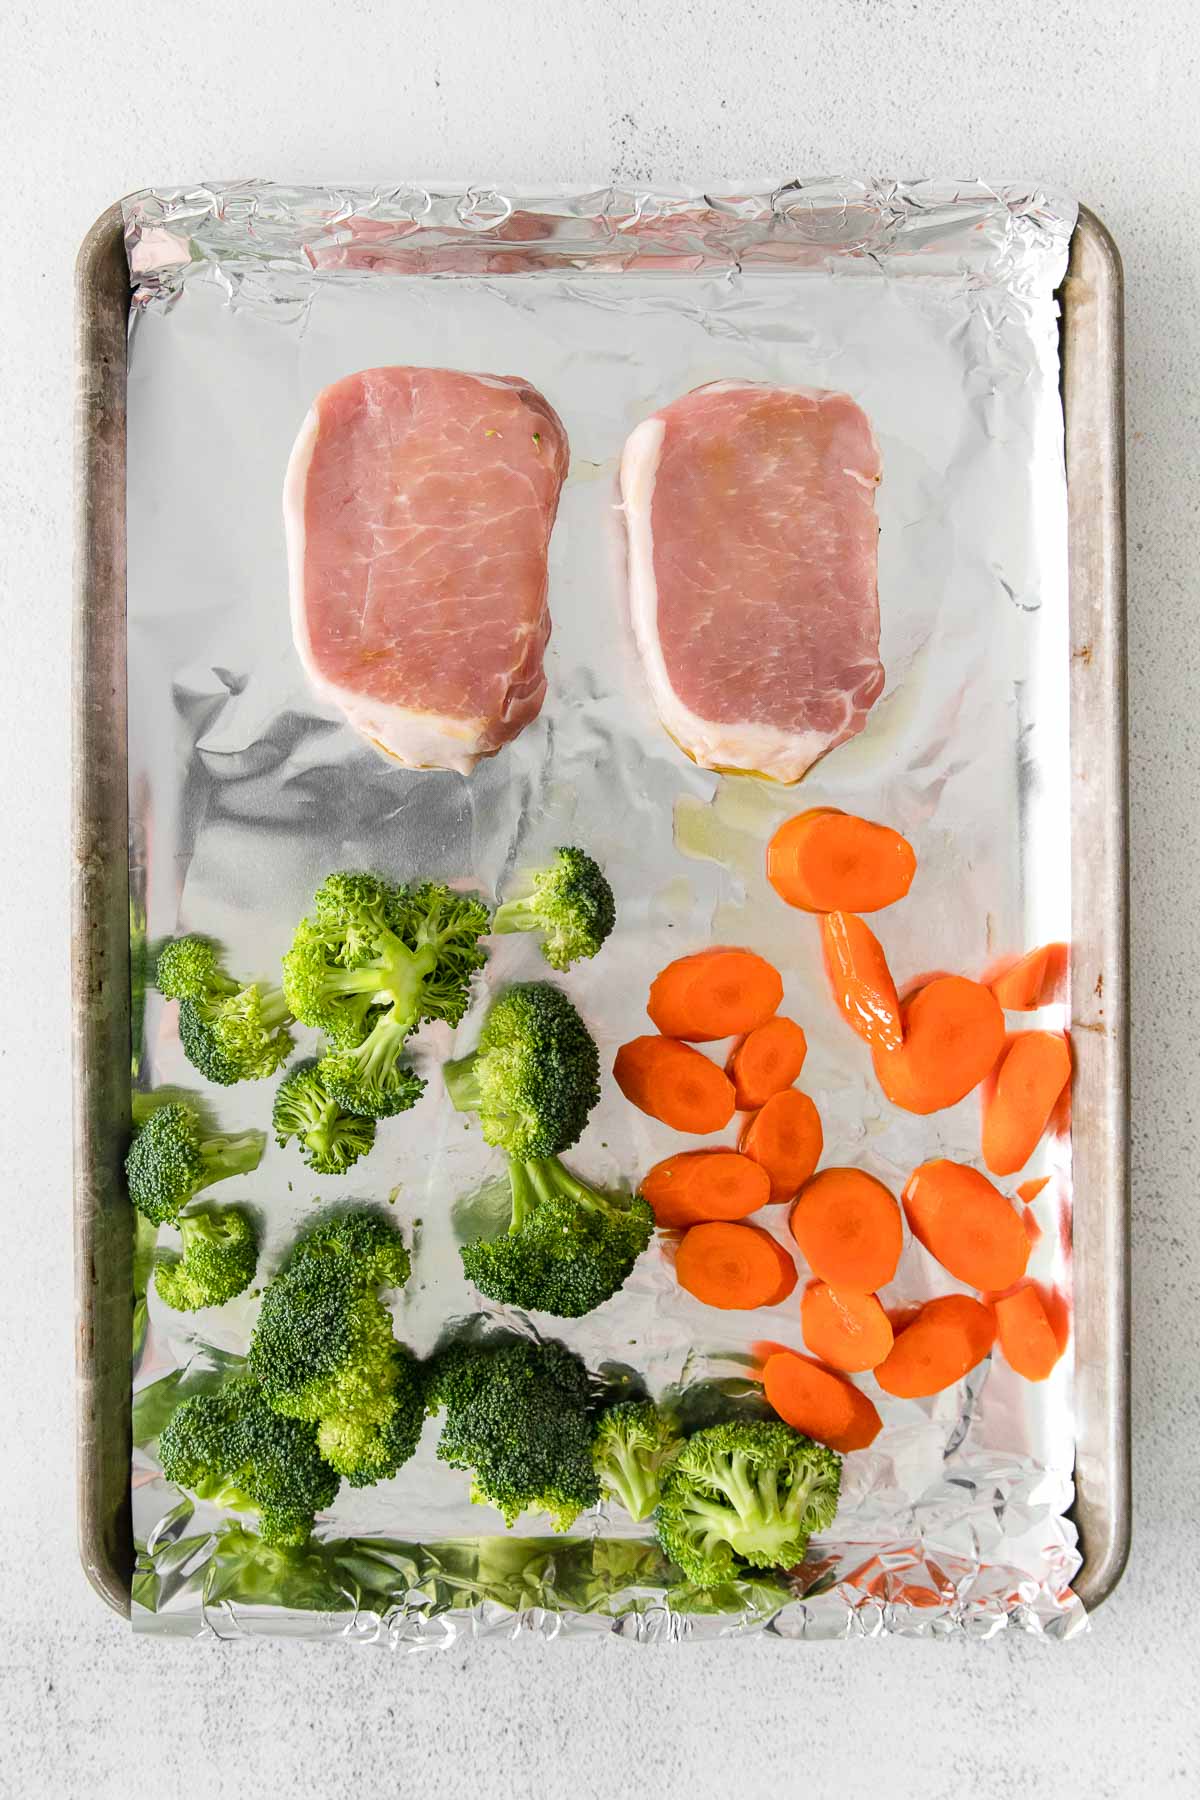 baking sheet with two raw pork chops, broccoli florets and sliced carrots